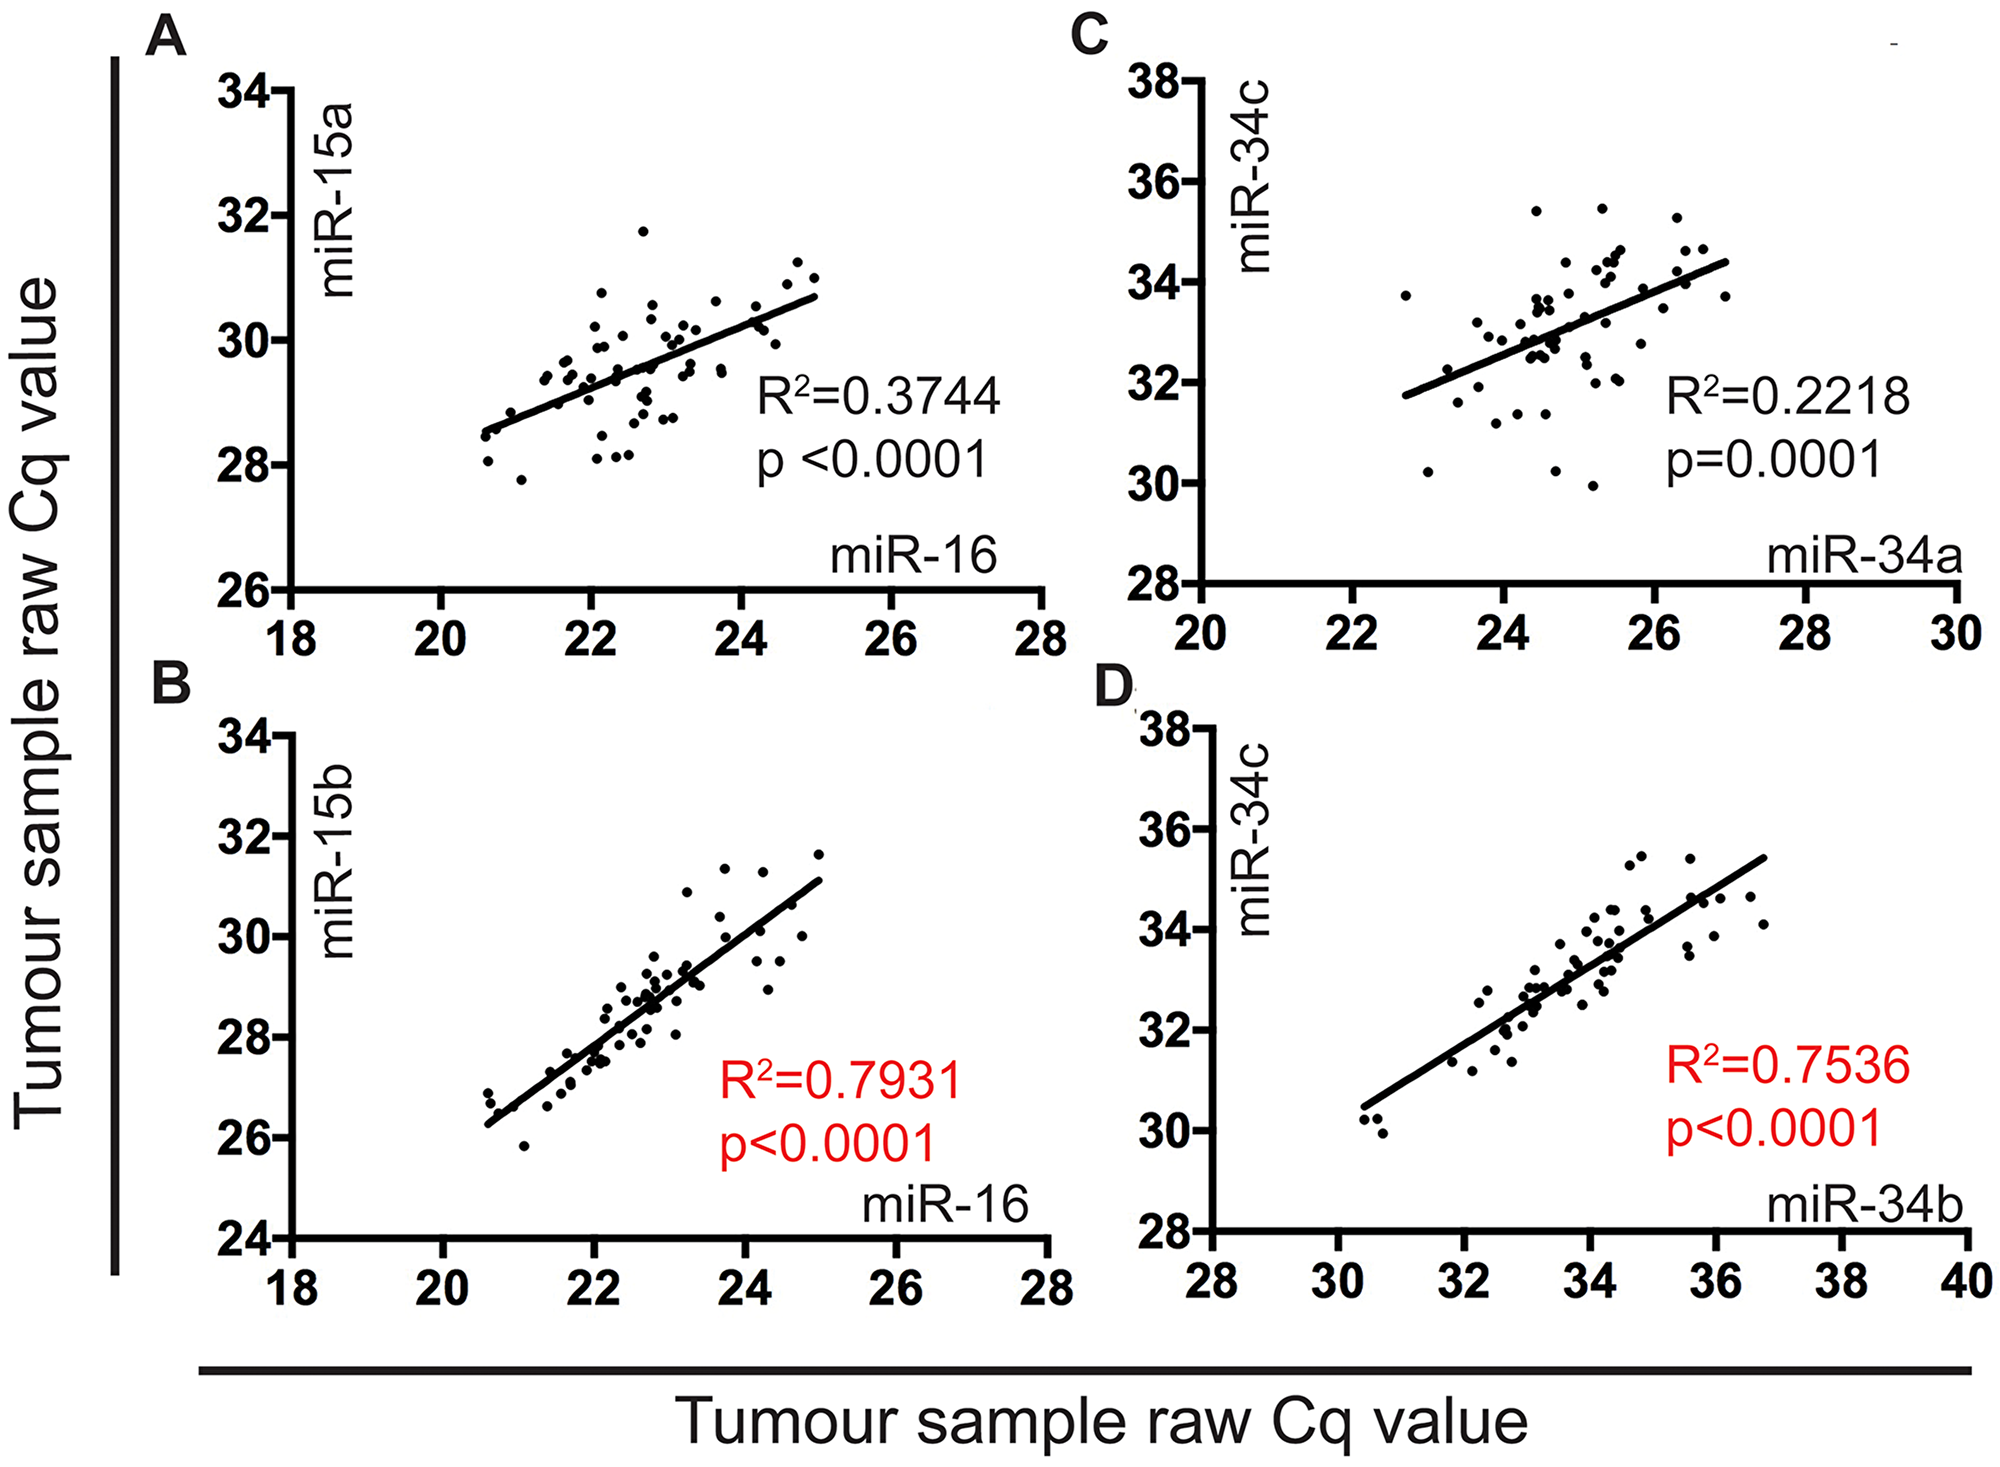 The expression of miR-15b and miR-16 is highly correlated in MPM tumor samples.